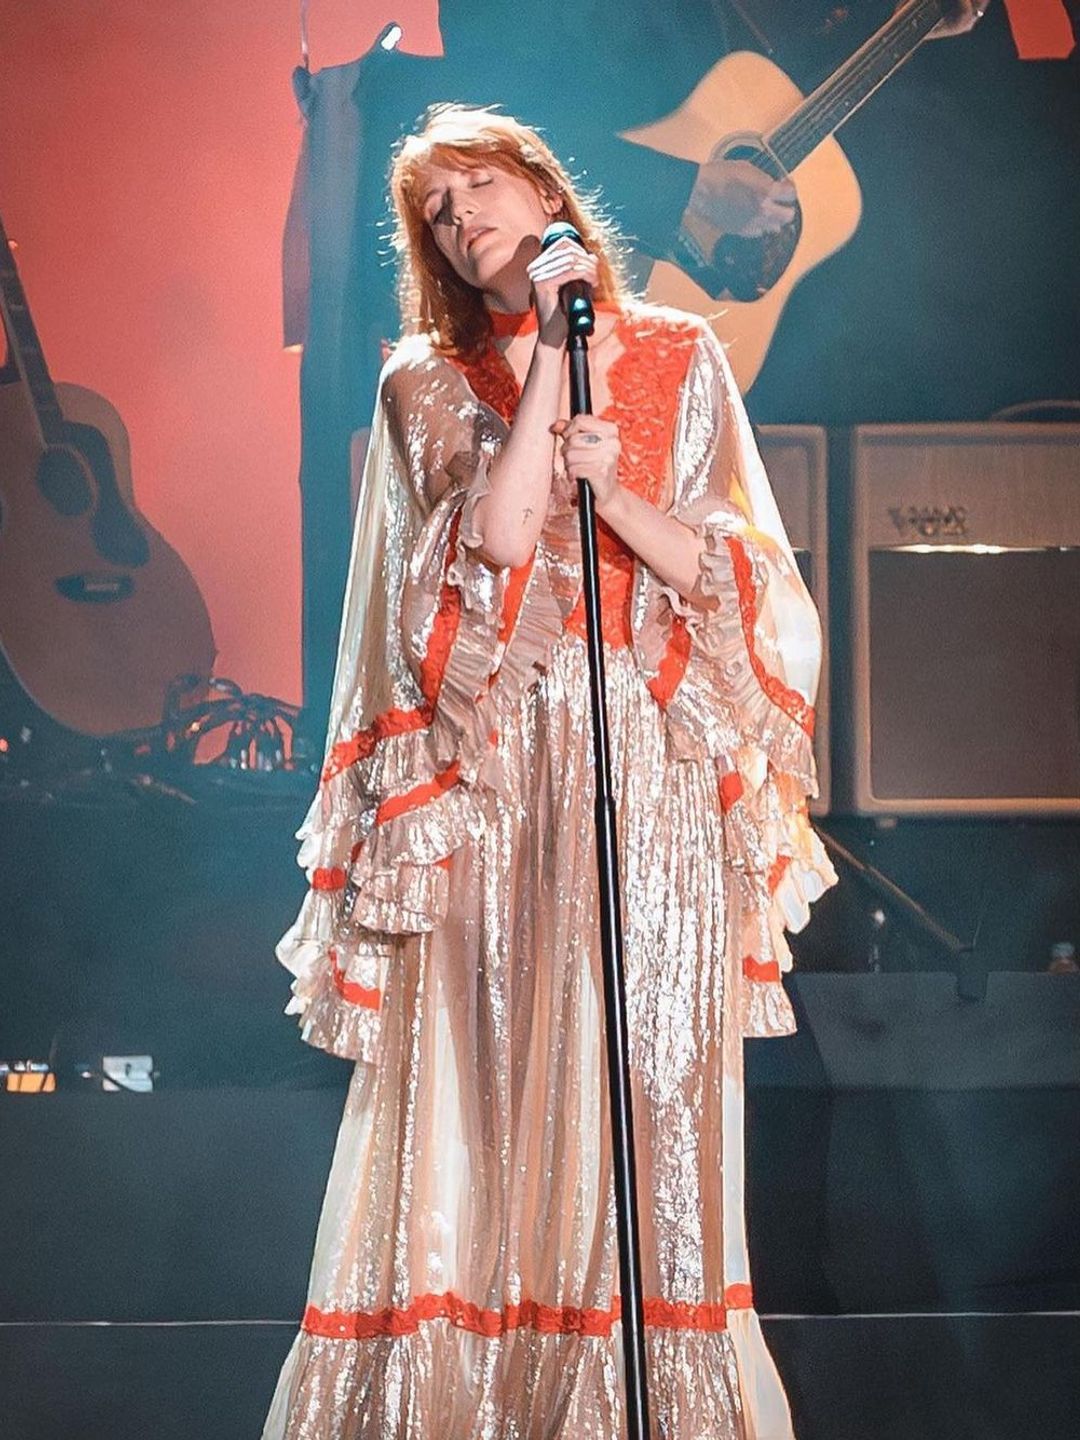 Florence Welch onstage performing in a shimmering gown